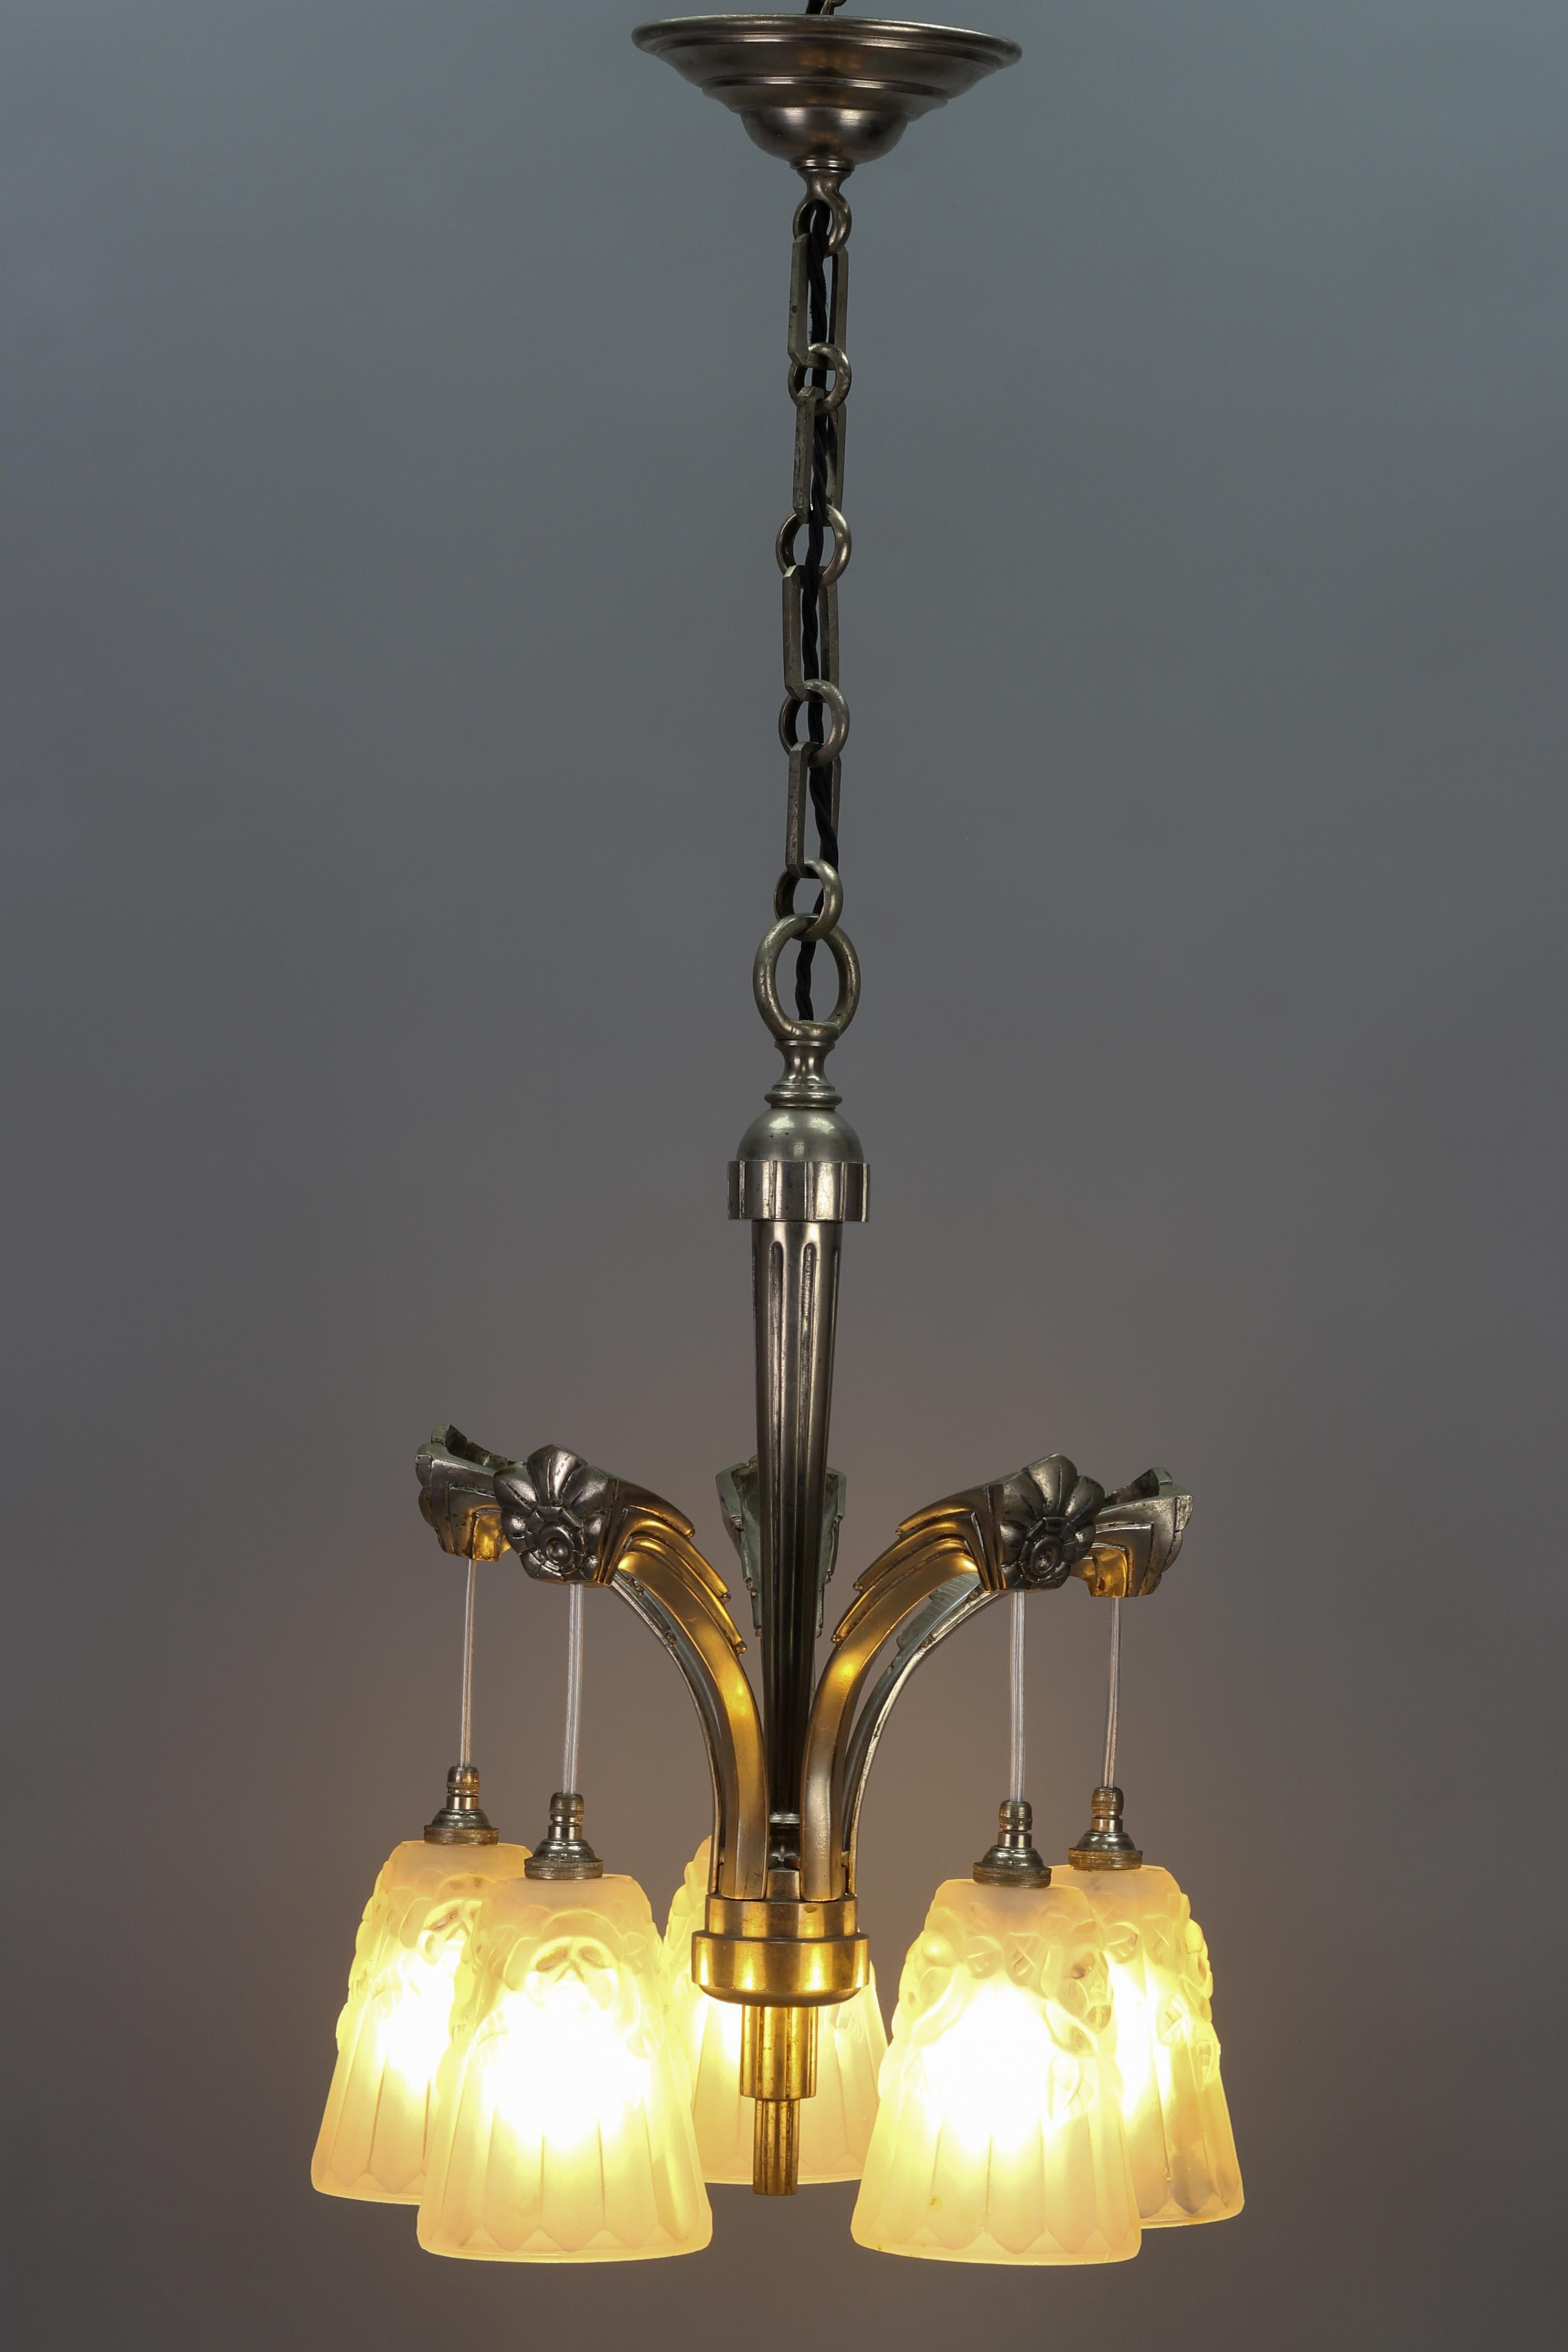 Mid-20th Century French Art Deco Brass Five-Light Chandelier with White Glass by Degué, 1930s For Sale